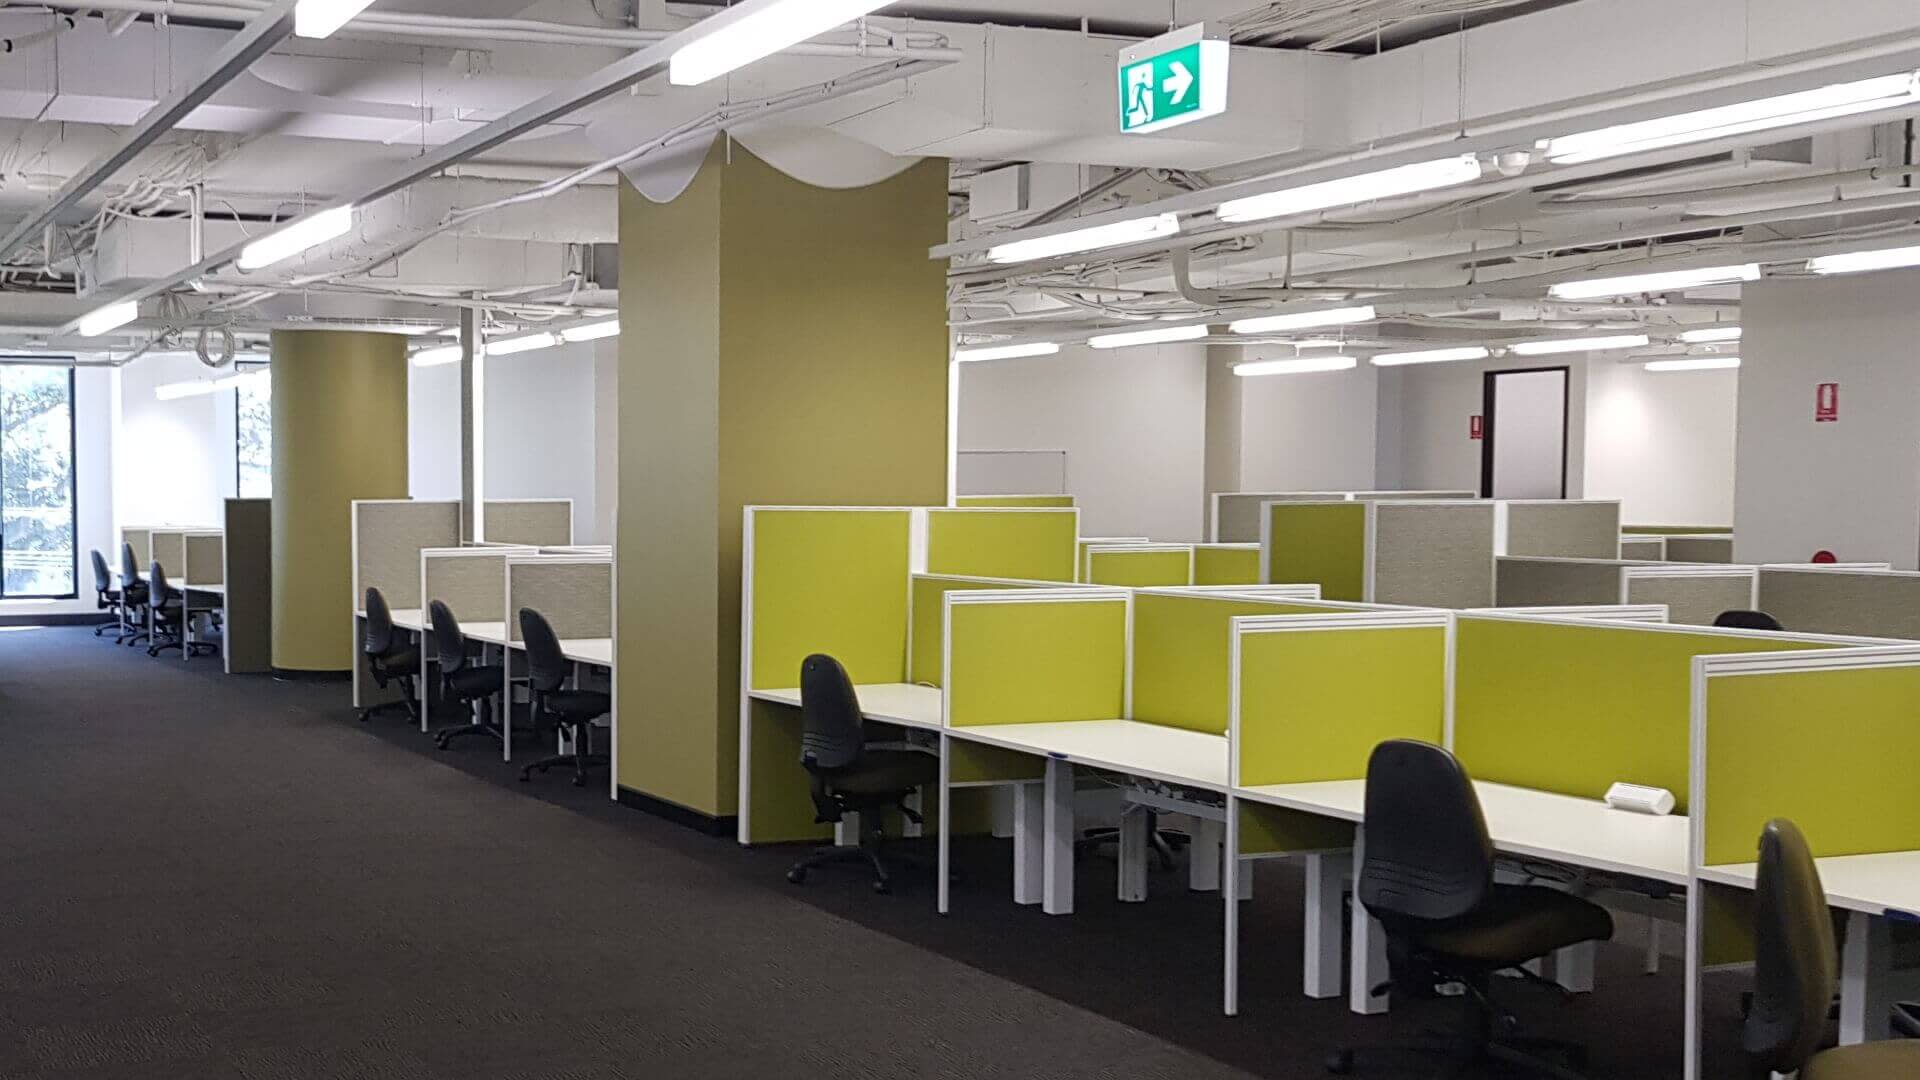 Cubicles in an office spaces